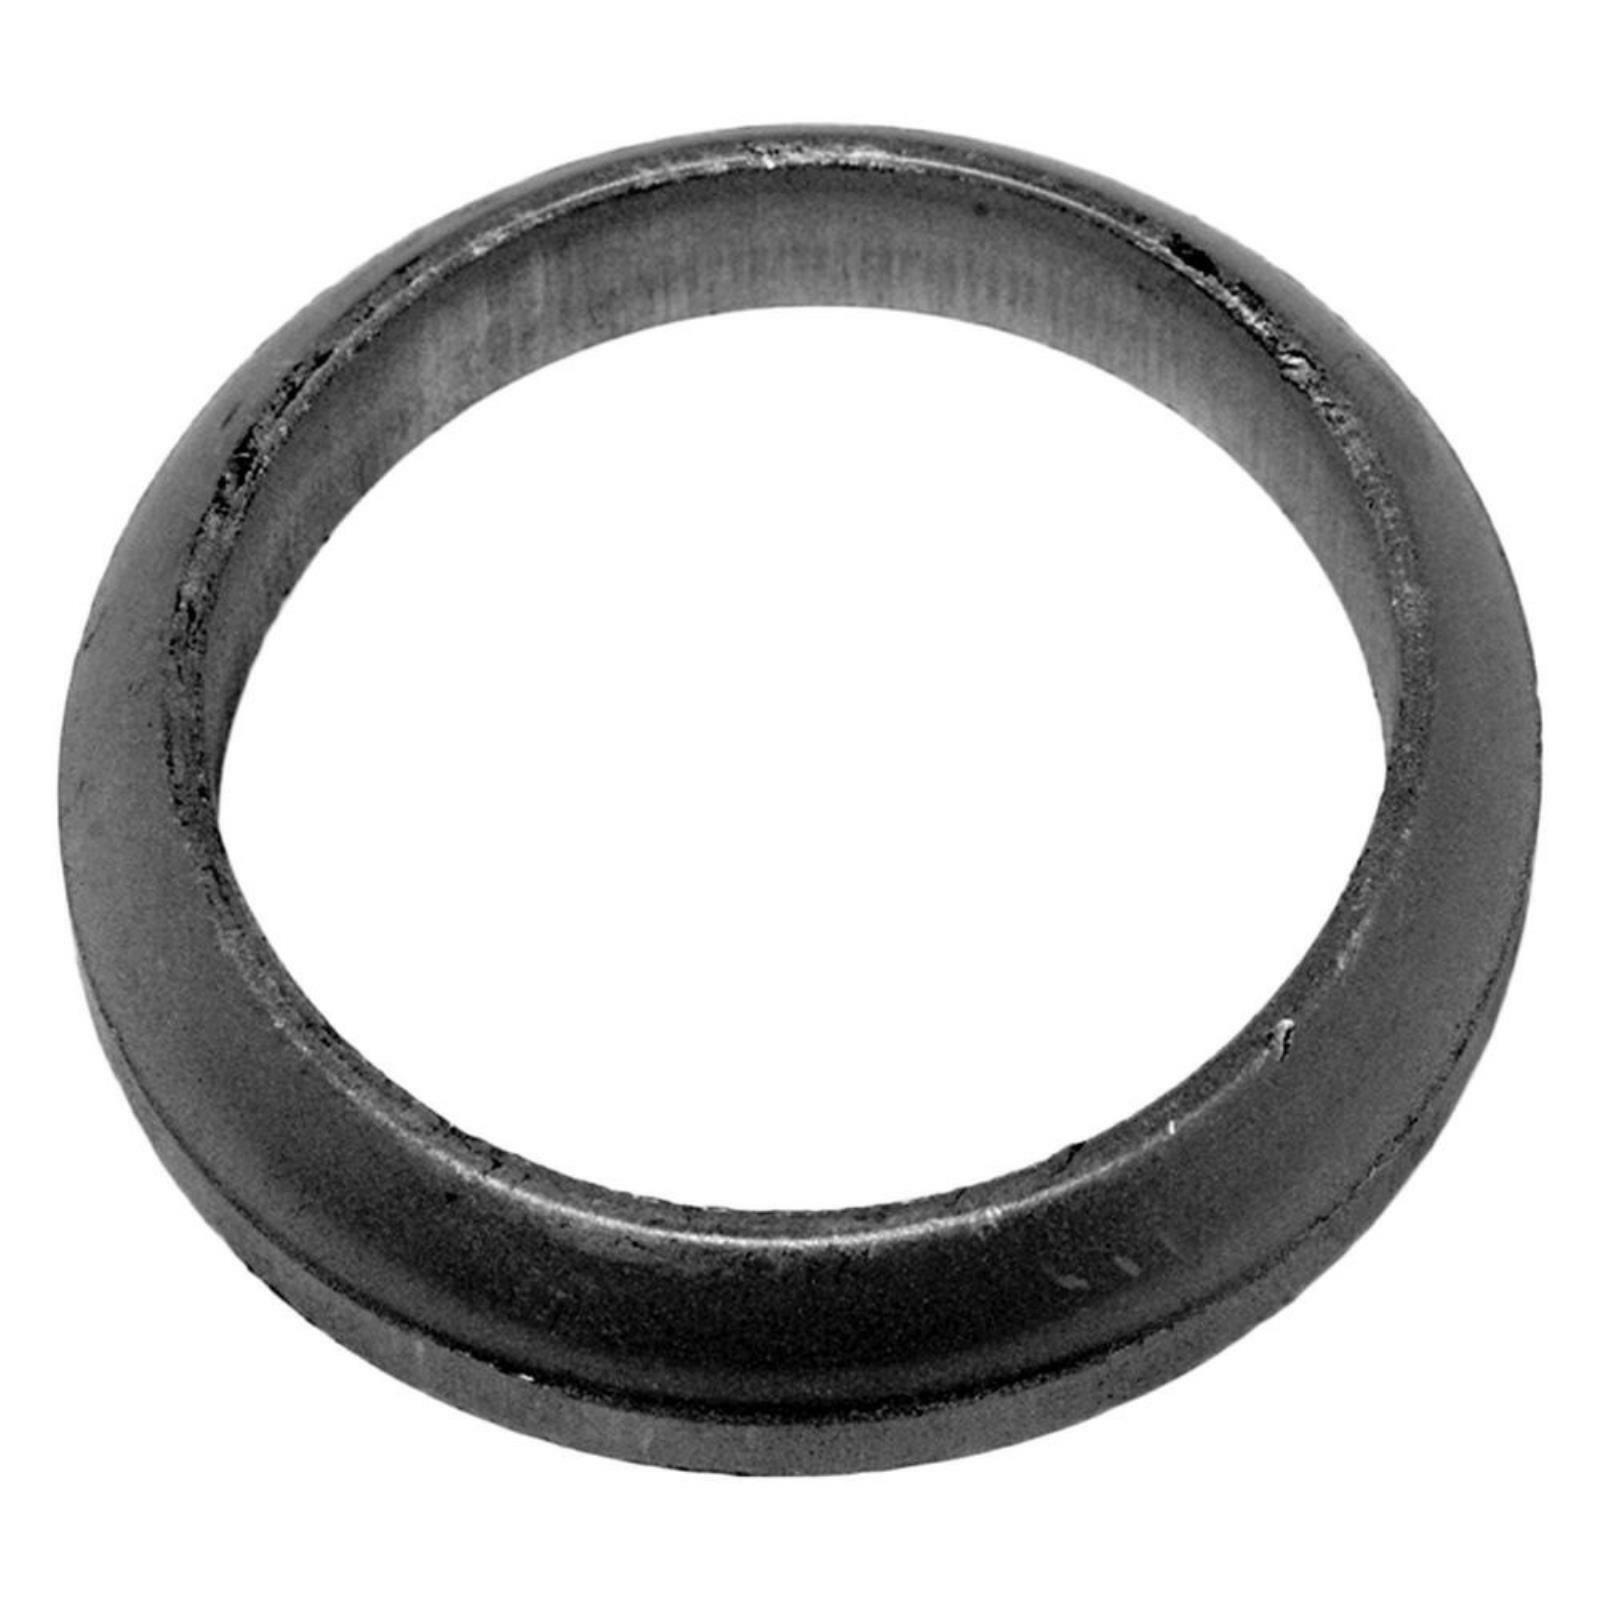 Graphoil Donut Exhaust Pipe Flange Gaske 340225 Fits 1987-1994 Plymouth Sundance